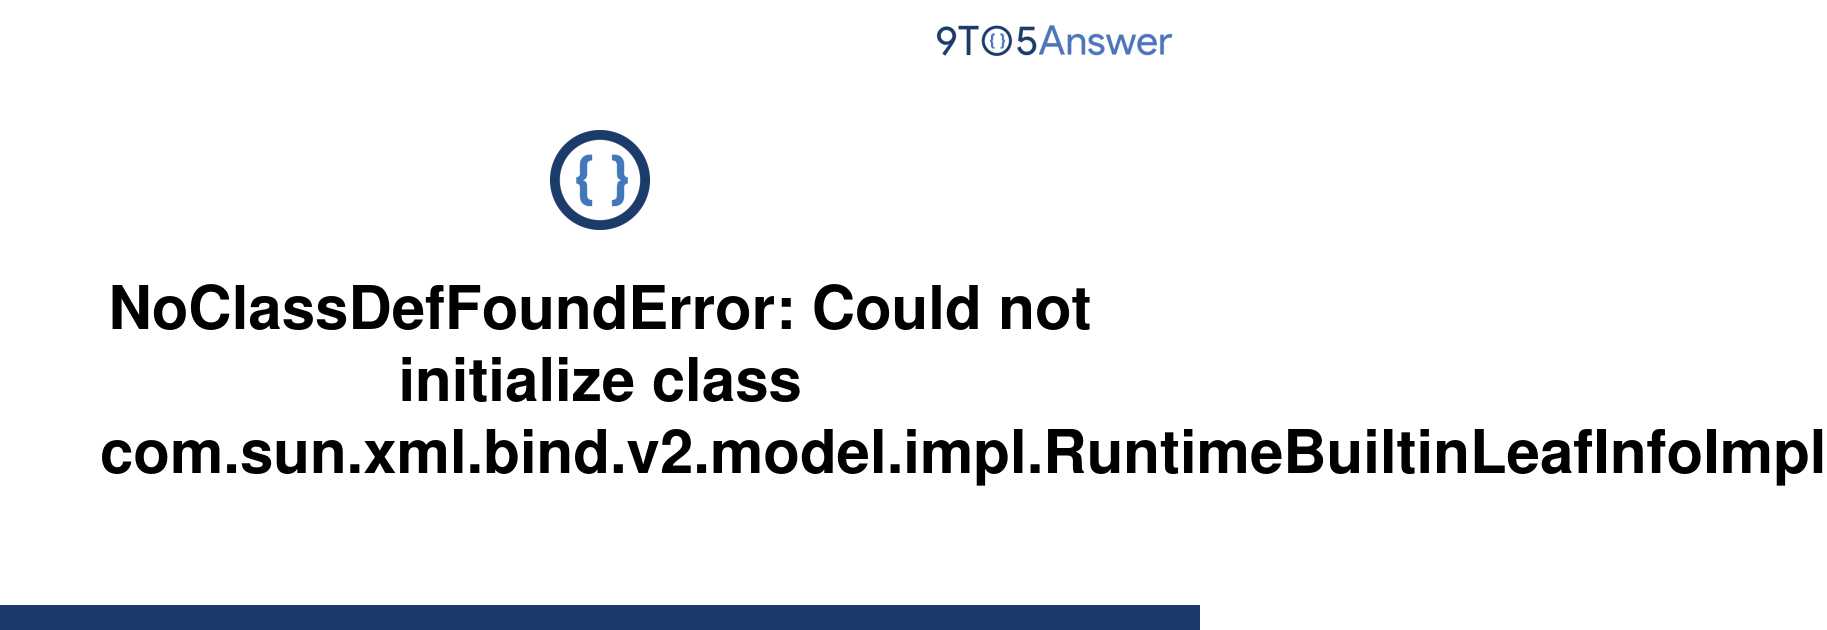 [Solved] NoClassDefFoundError Could not initialize class 9to5Answer